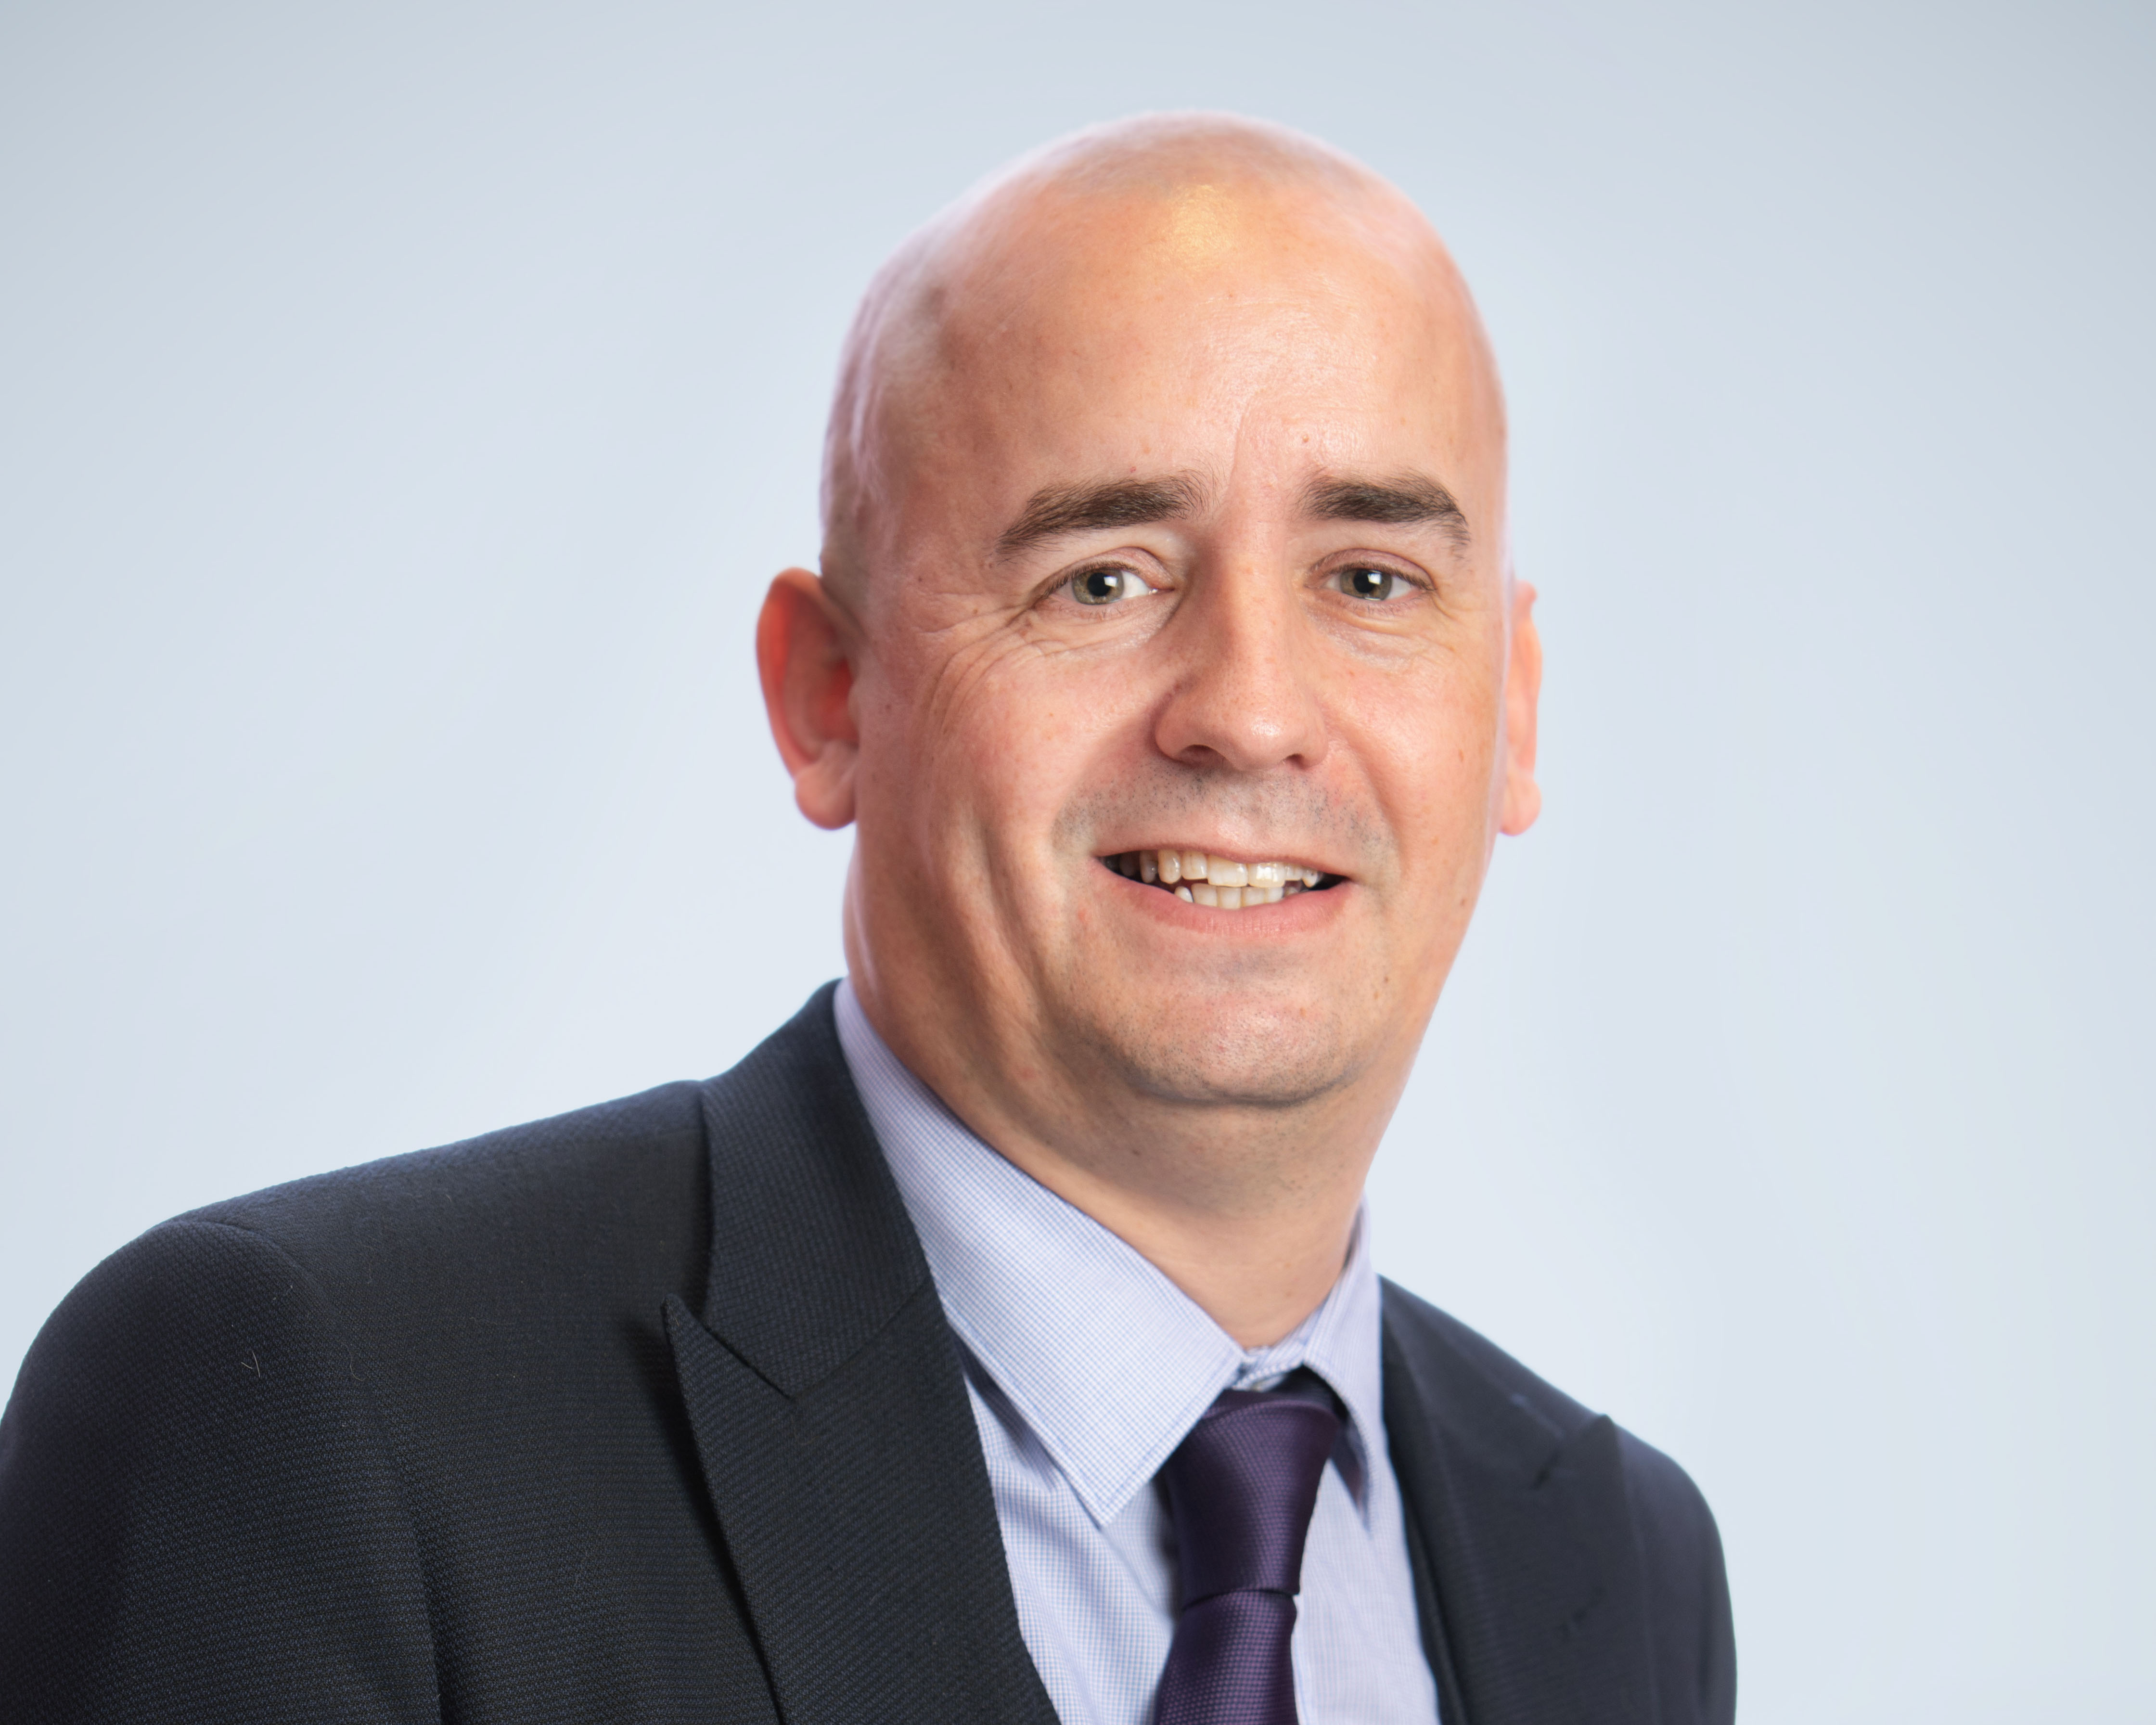 RFM appoints new construction and repair director for Scotland